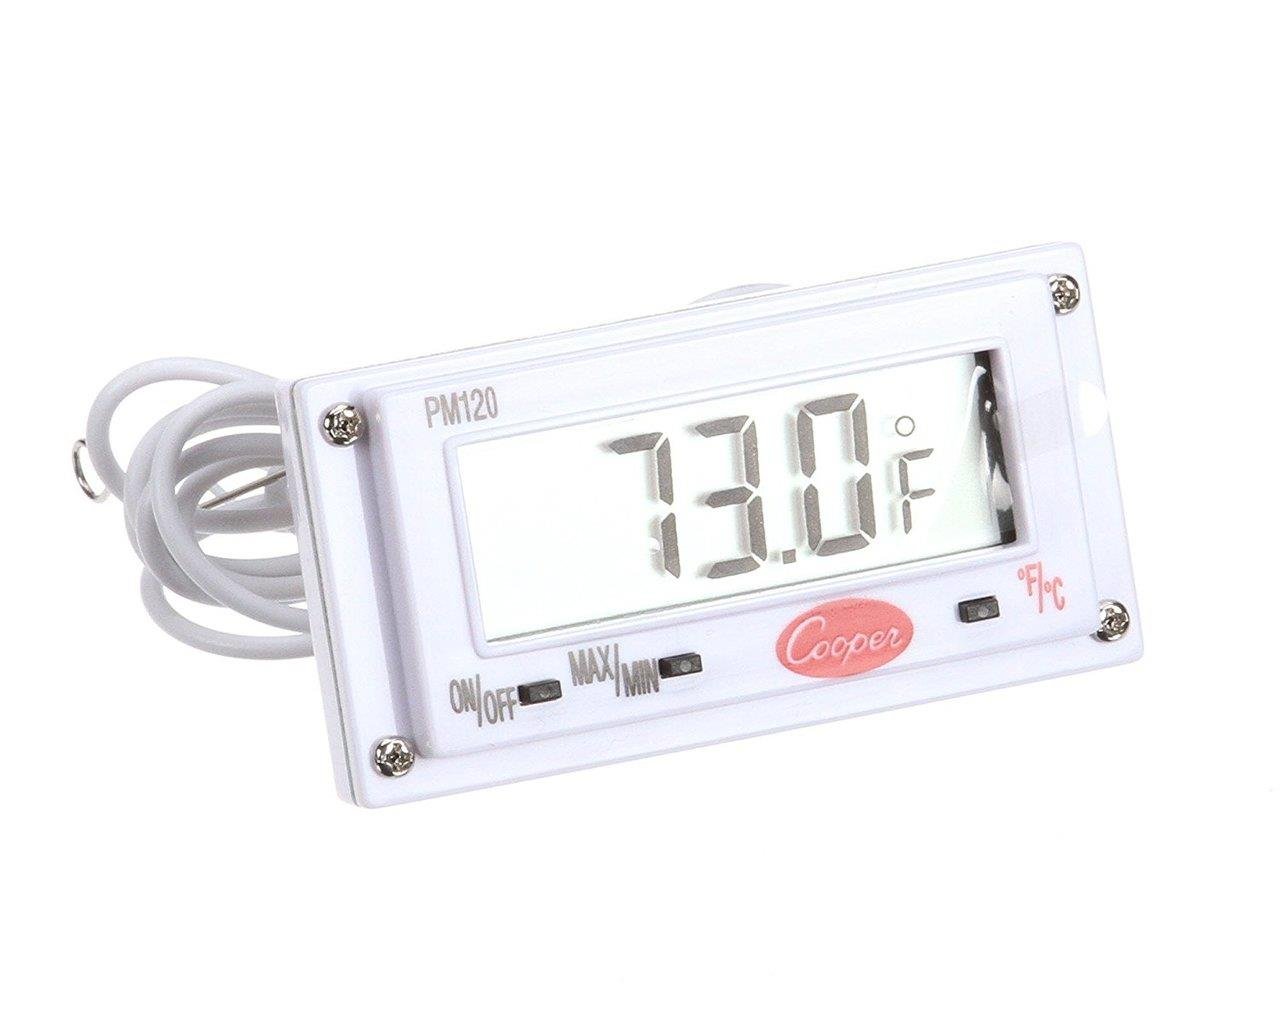 Bulk Digital Panel Thermometer 2.6x1.4 -40/120 F/C: Cooper Atkins PM120-0-8  (58 Panel Thermometers) - Myriad Greeyn Office Supplies - Disabled Veteran  Owned SDVOSB, AbilityOne Distributor